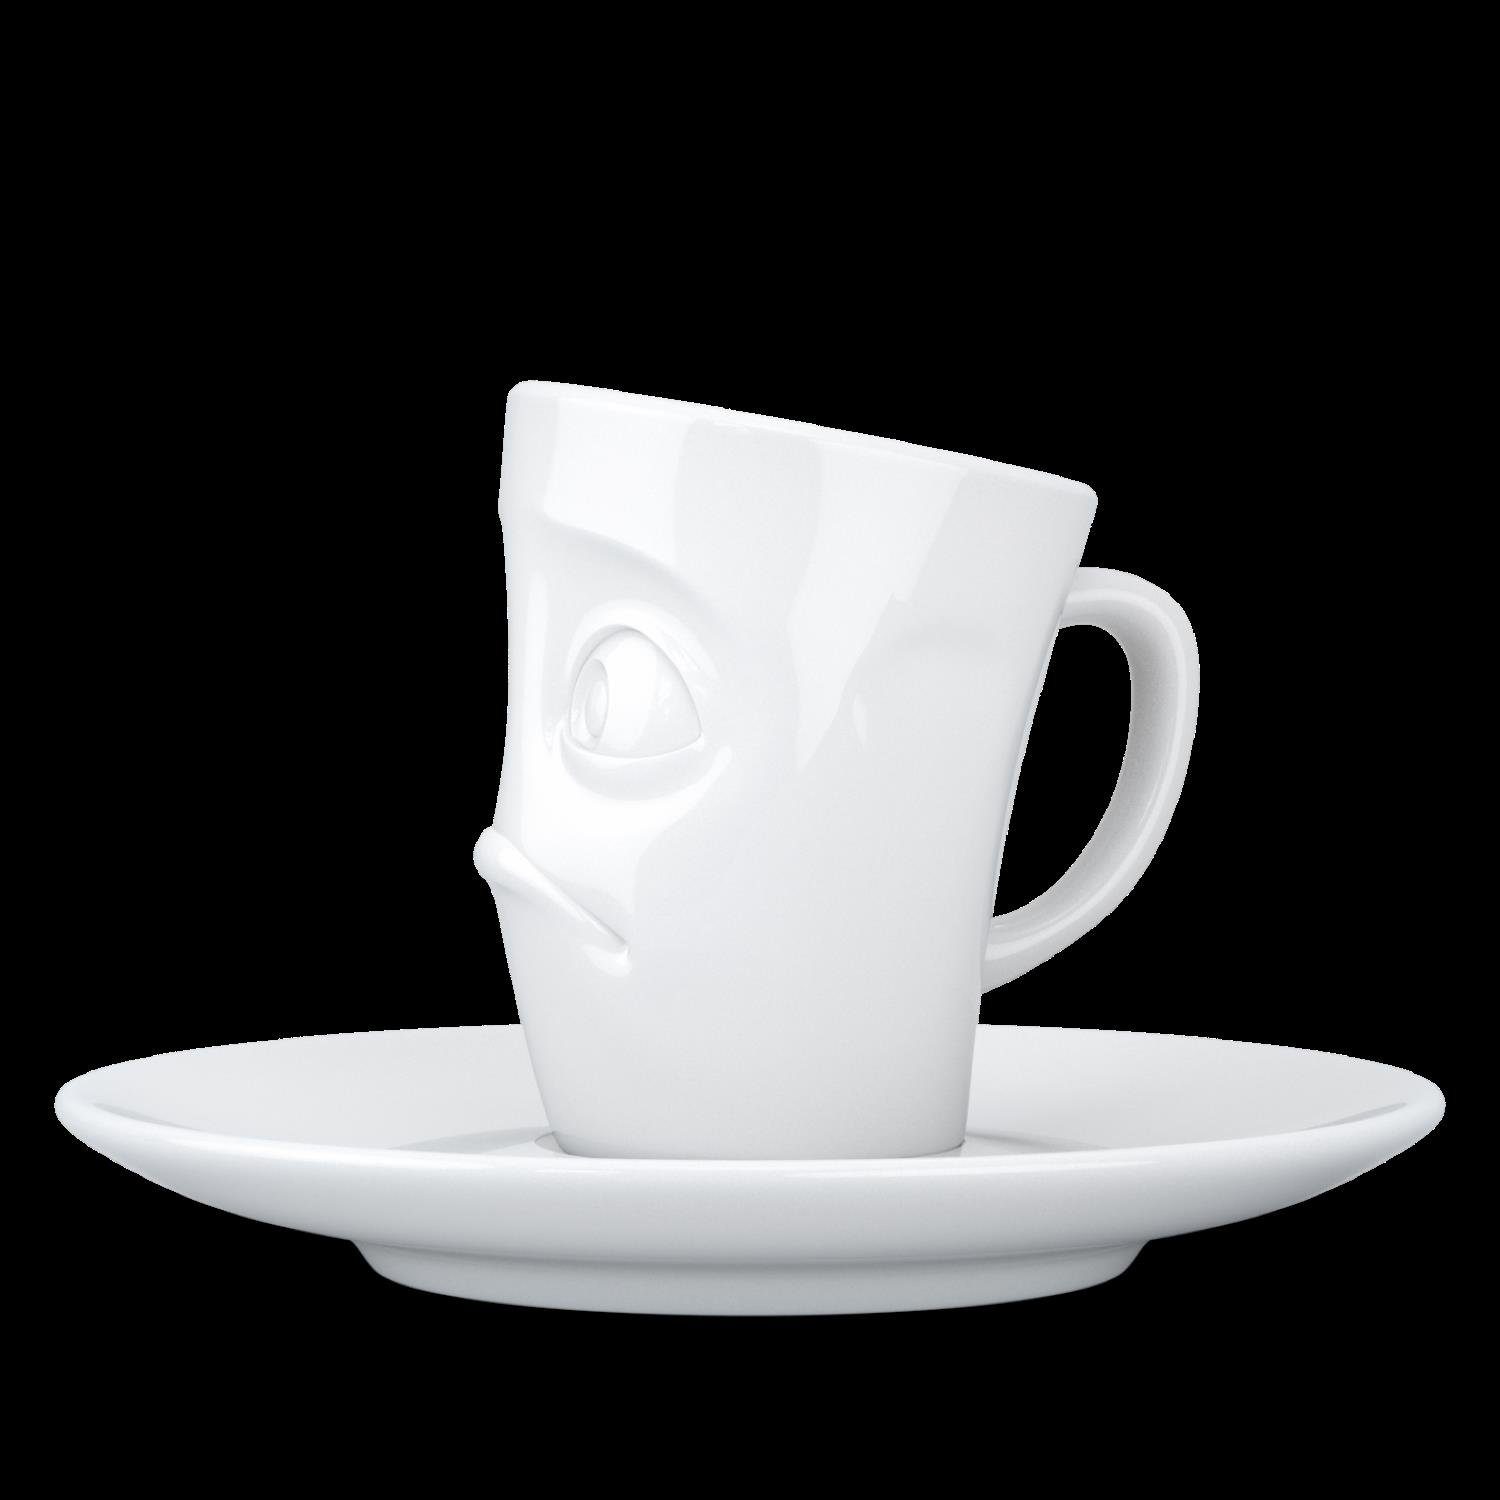 Tasse Henkel - Espresso PRODUCTS Products FIFTYEIGHT Mug mit Fiftyeight